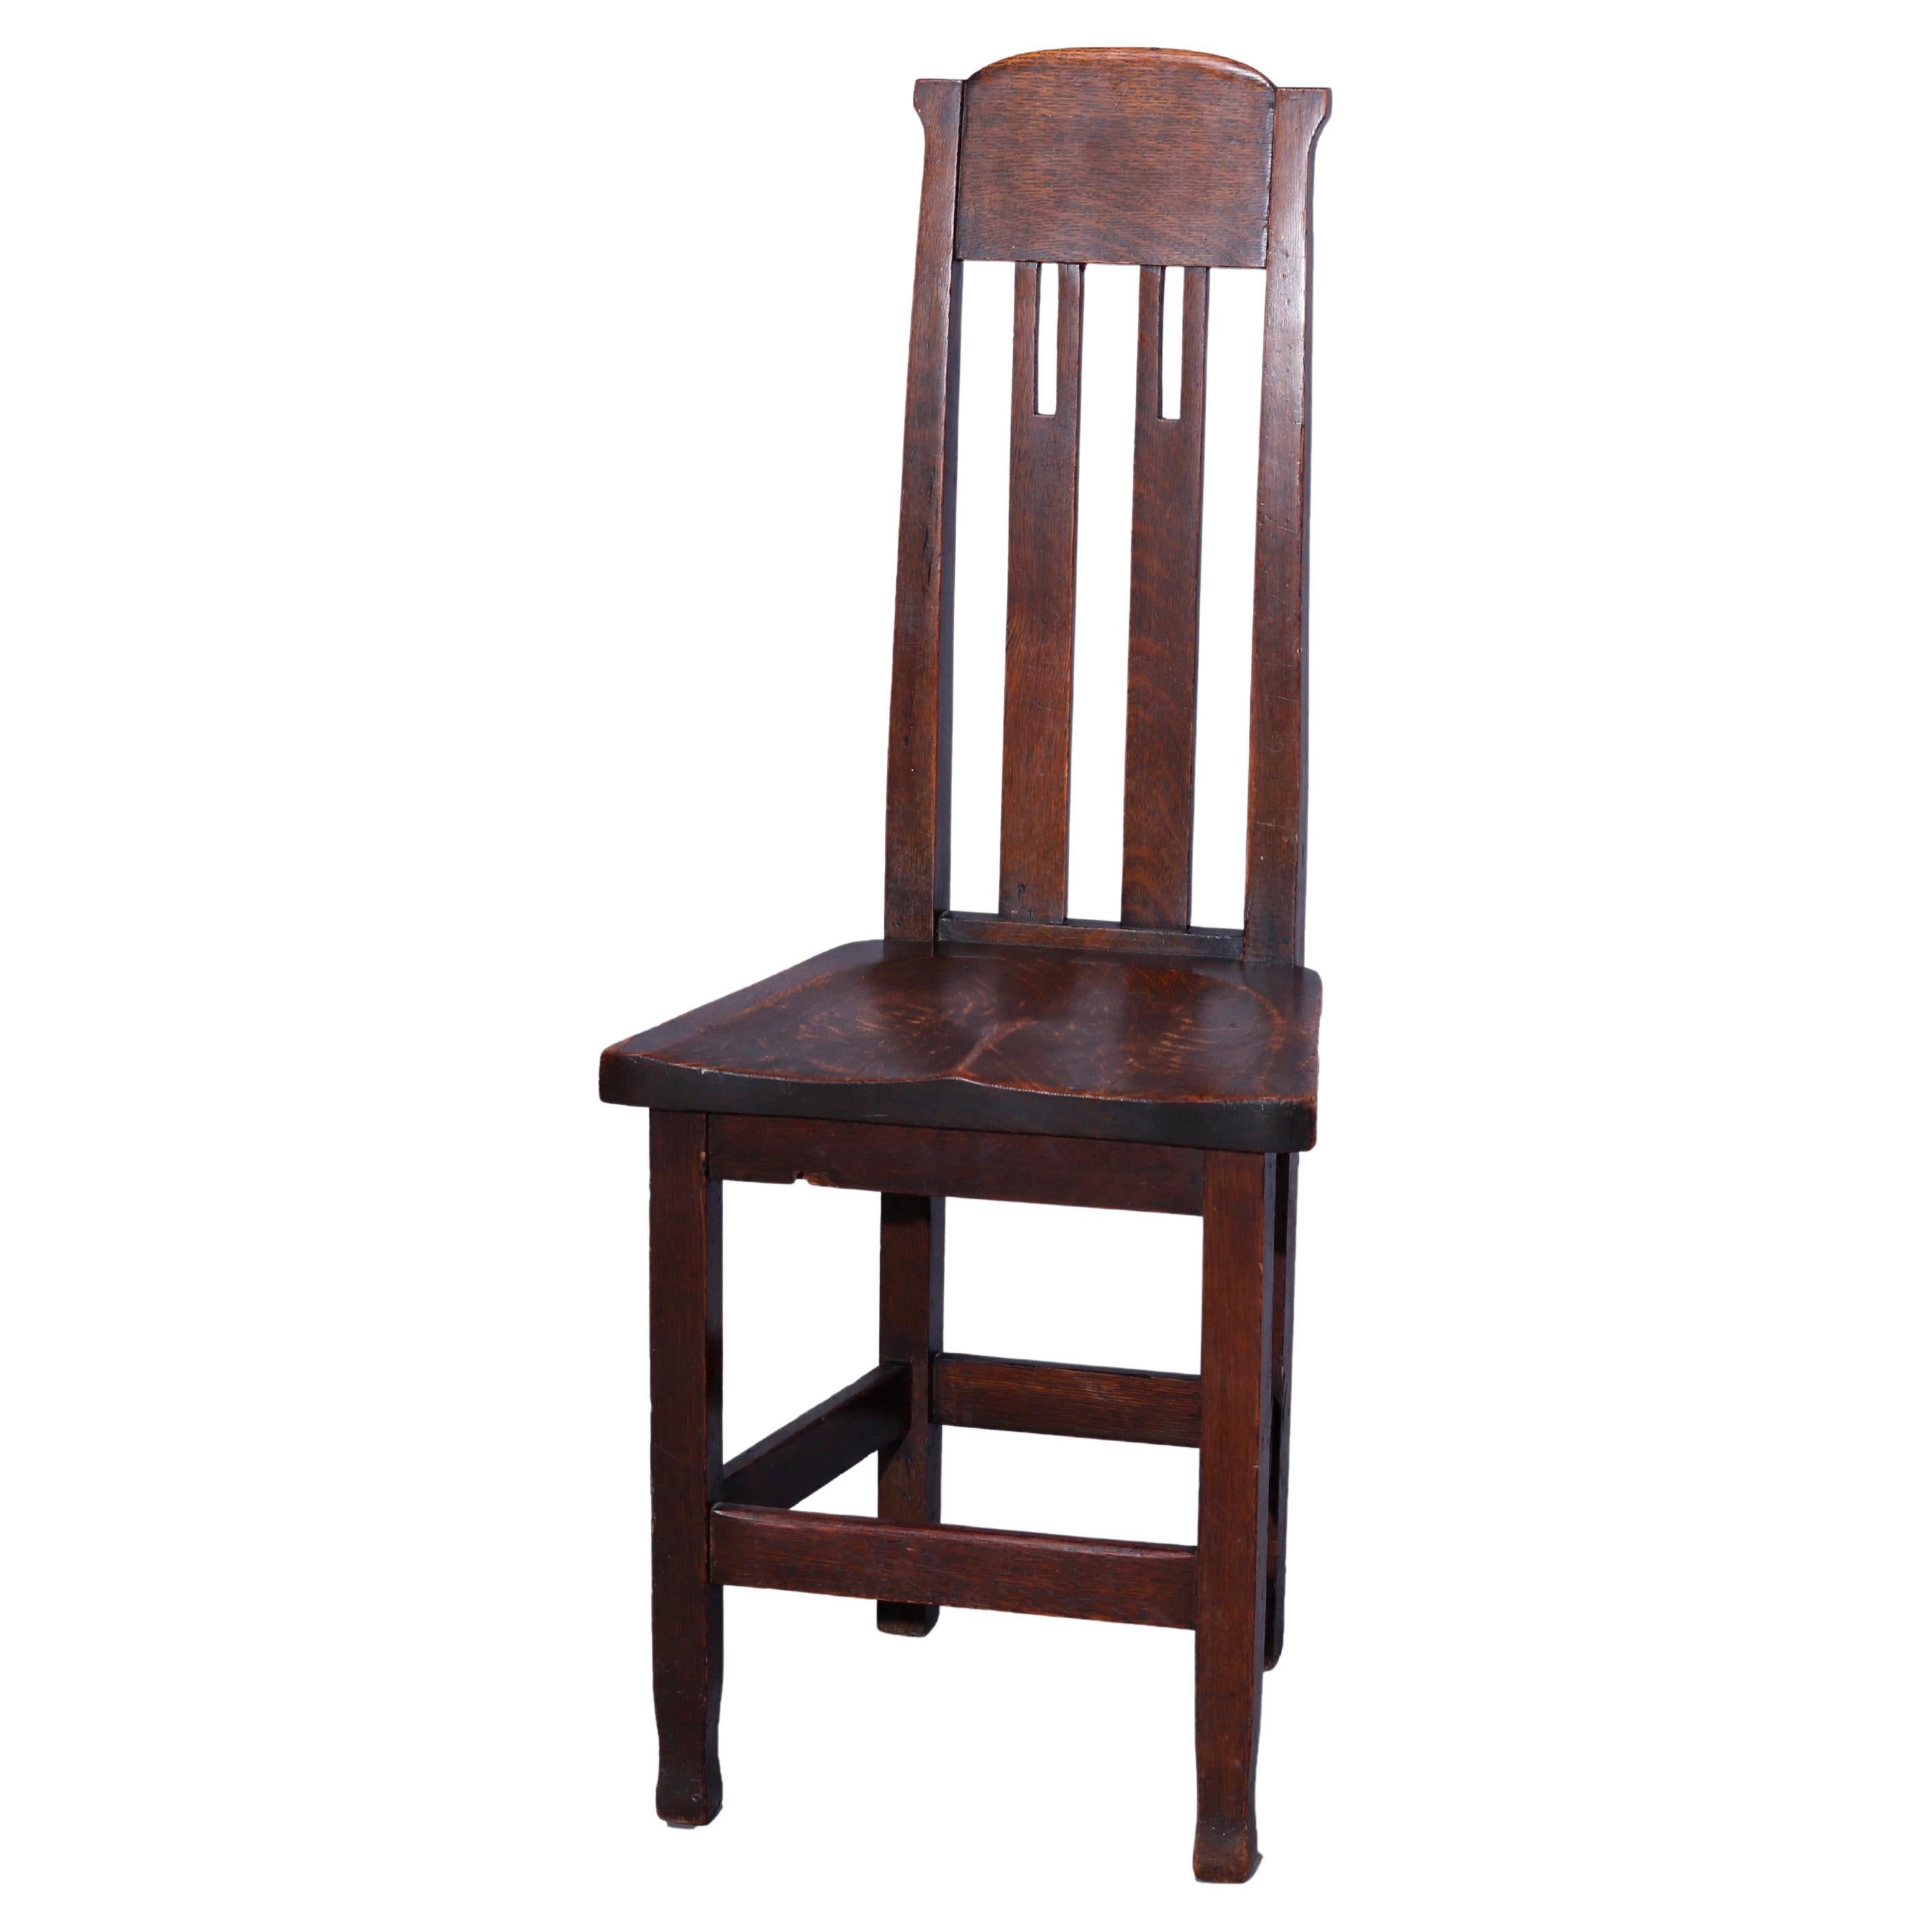 Antique Arts & Crafts Mission Oak Stickley Brothers School Side Chair, c1910